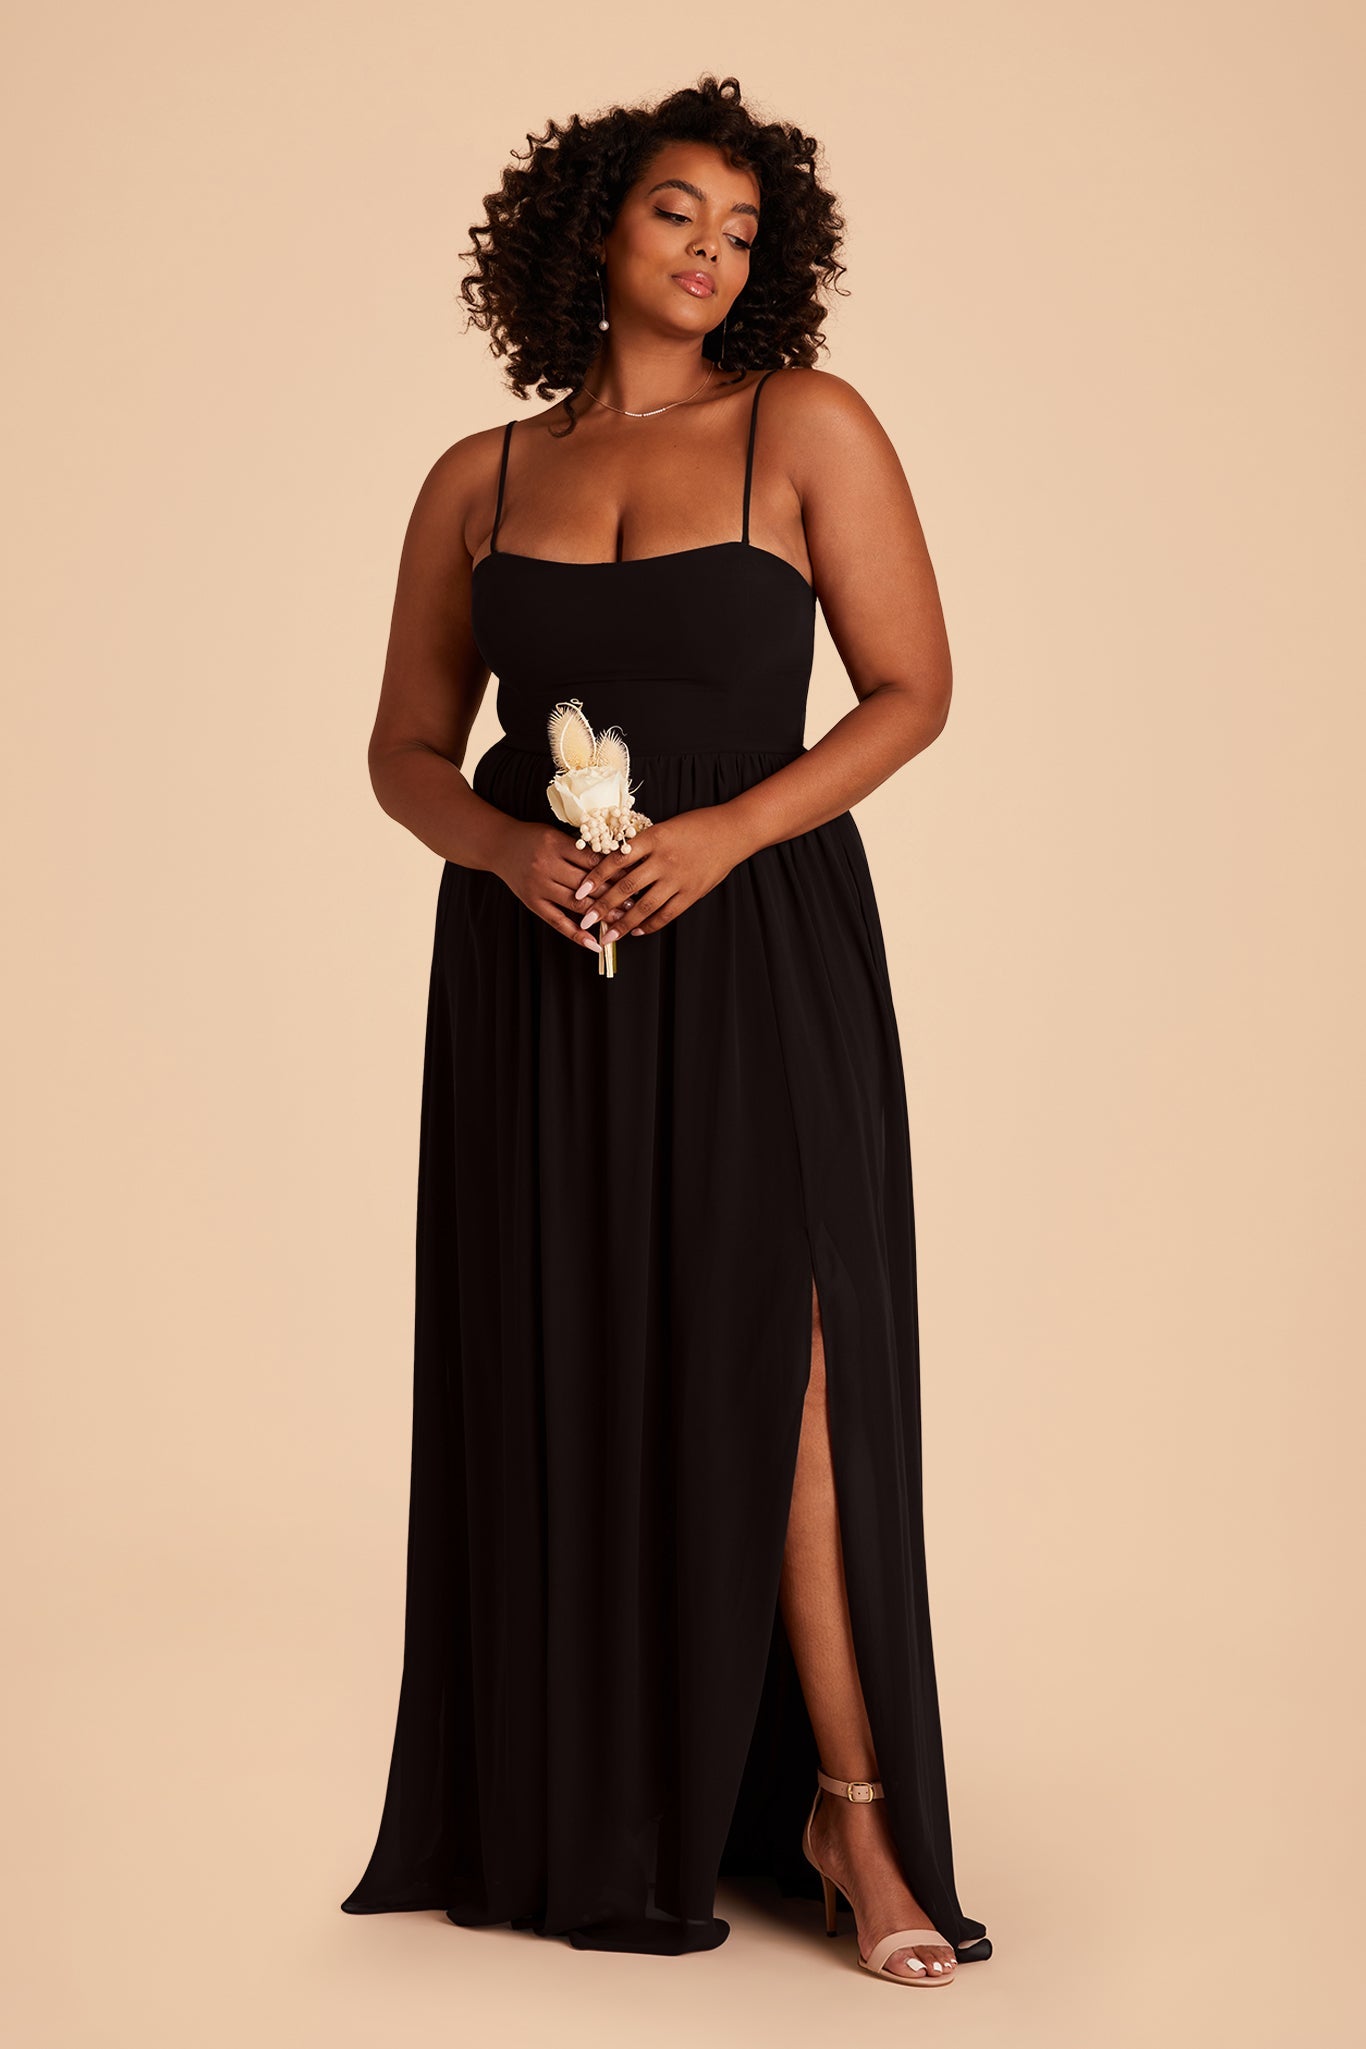 August plus size bridesmaid dress with slit in black chiffon by Birdy Grey, front view